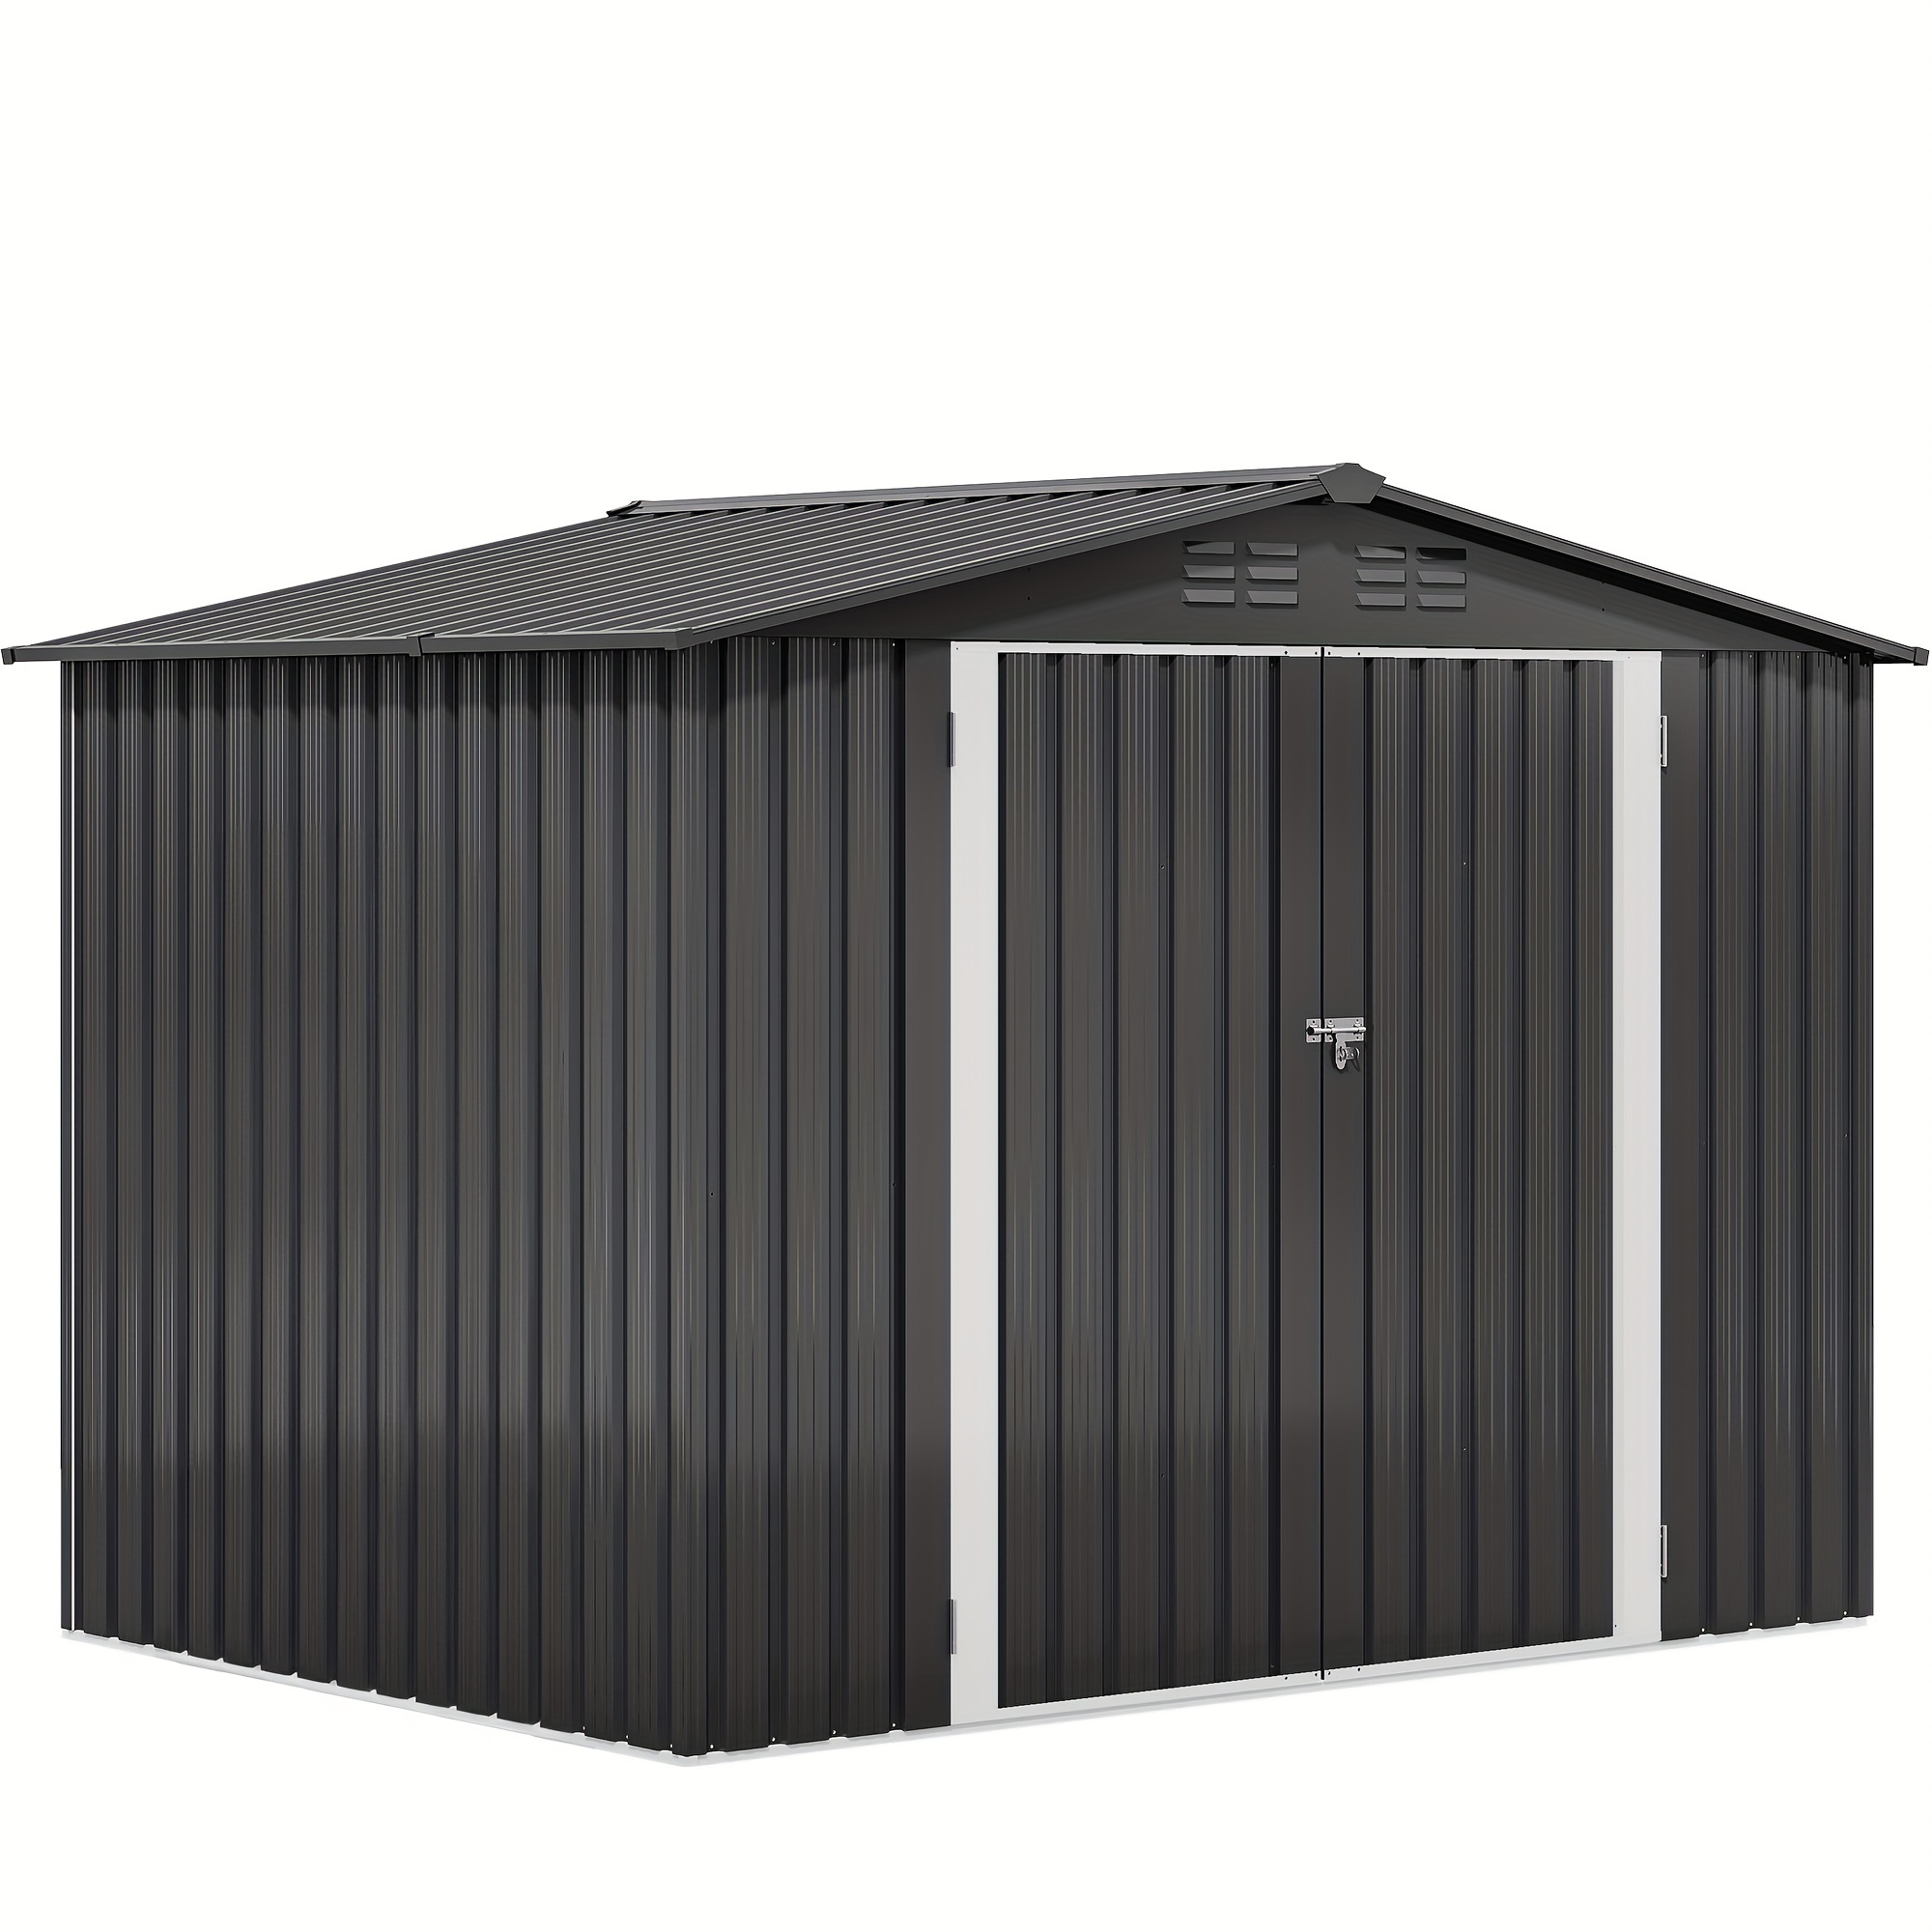 

Homiflex 8x6 Ft Outdoor Storage Shed, Large Metal Tool Sheds, Heavy Duty Storage House With Lockable Doors & Air Vent For Backyard Patio Lawn To Store Bikes, Tools, , Dary Gray